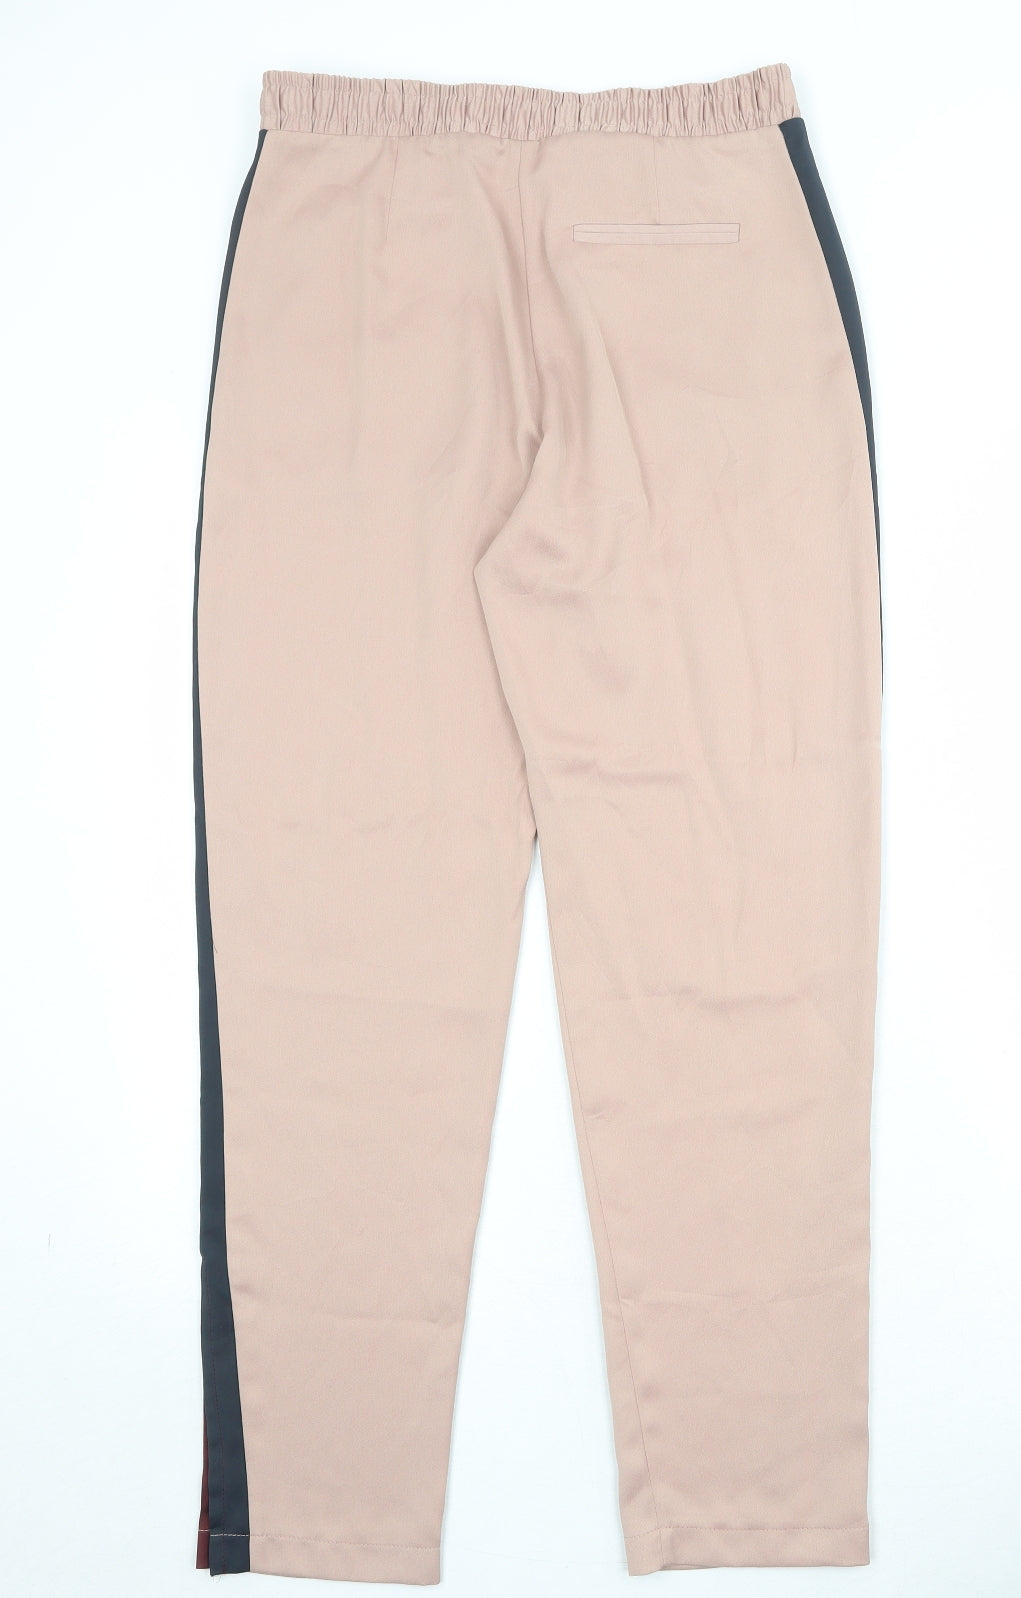 Topshop Womens Pink Polyester Trousers Size 10 Regular Zip